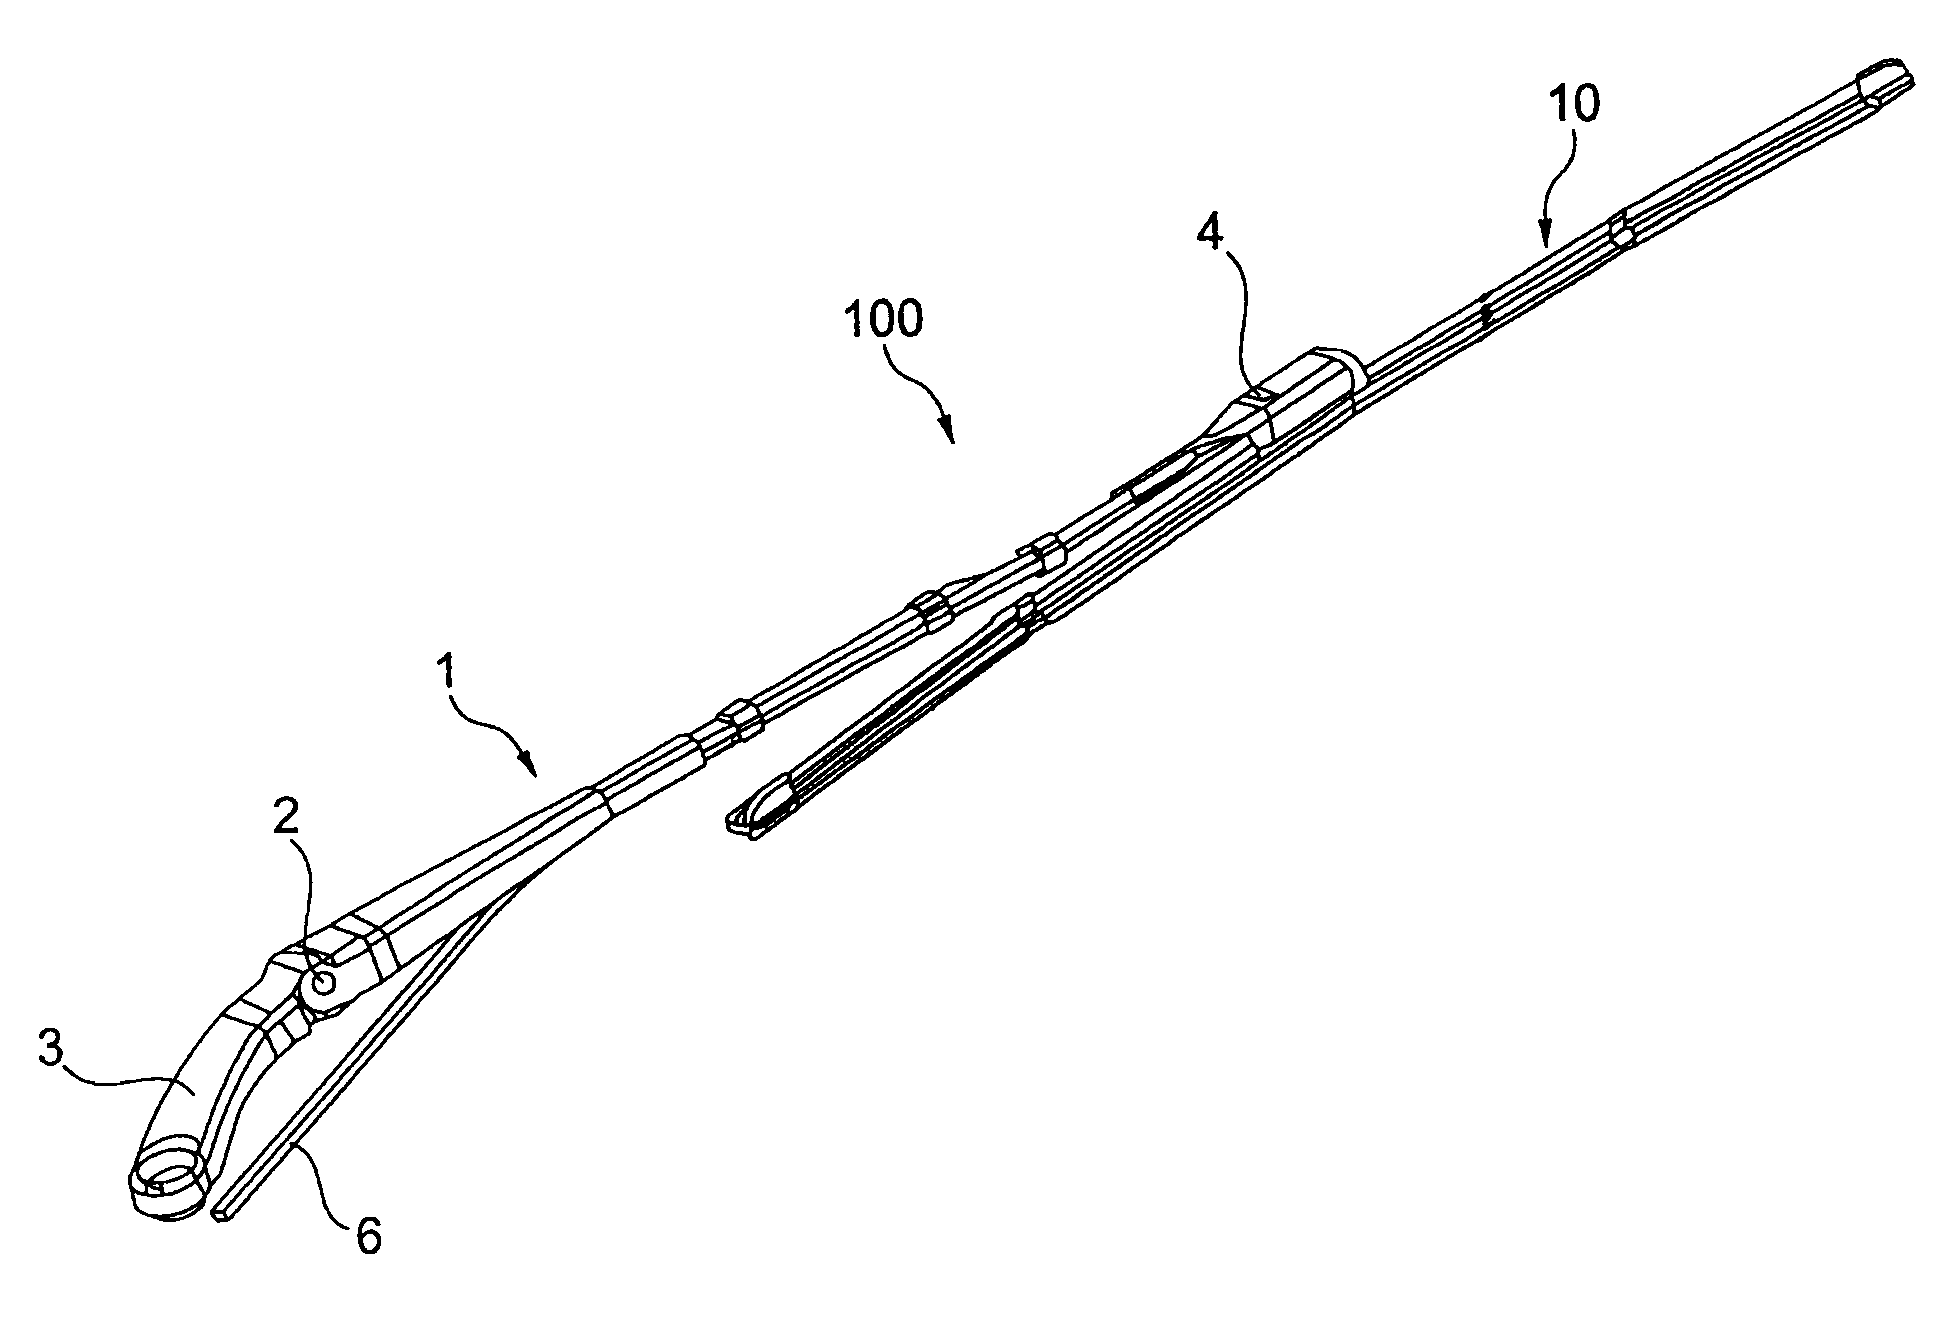 Wiper Blade for Cleaning Windows of Motor Vehicles and Wiper Arm